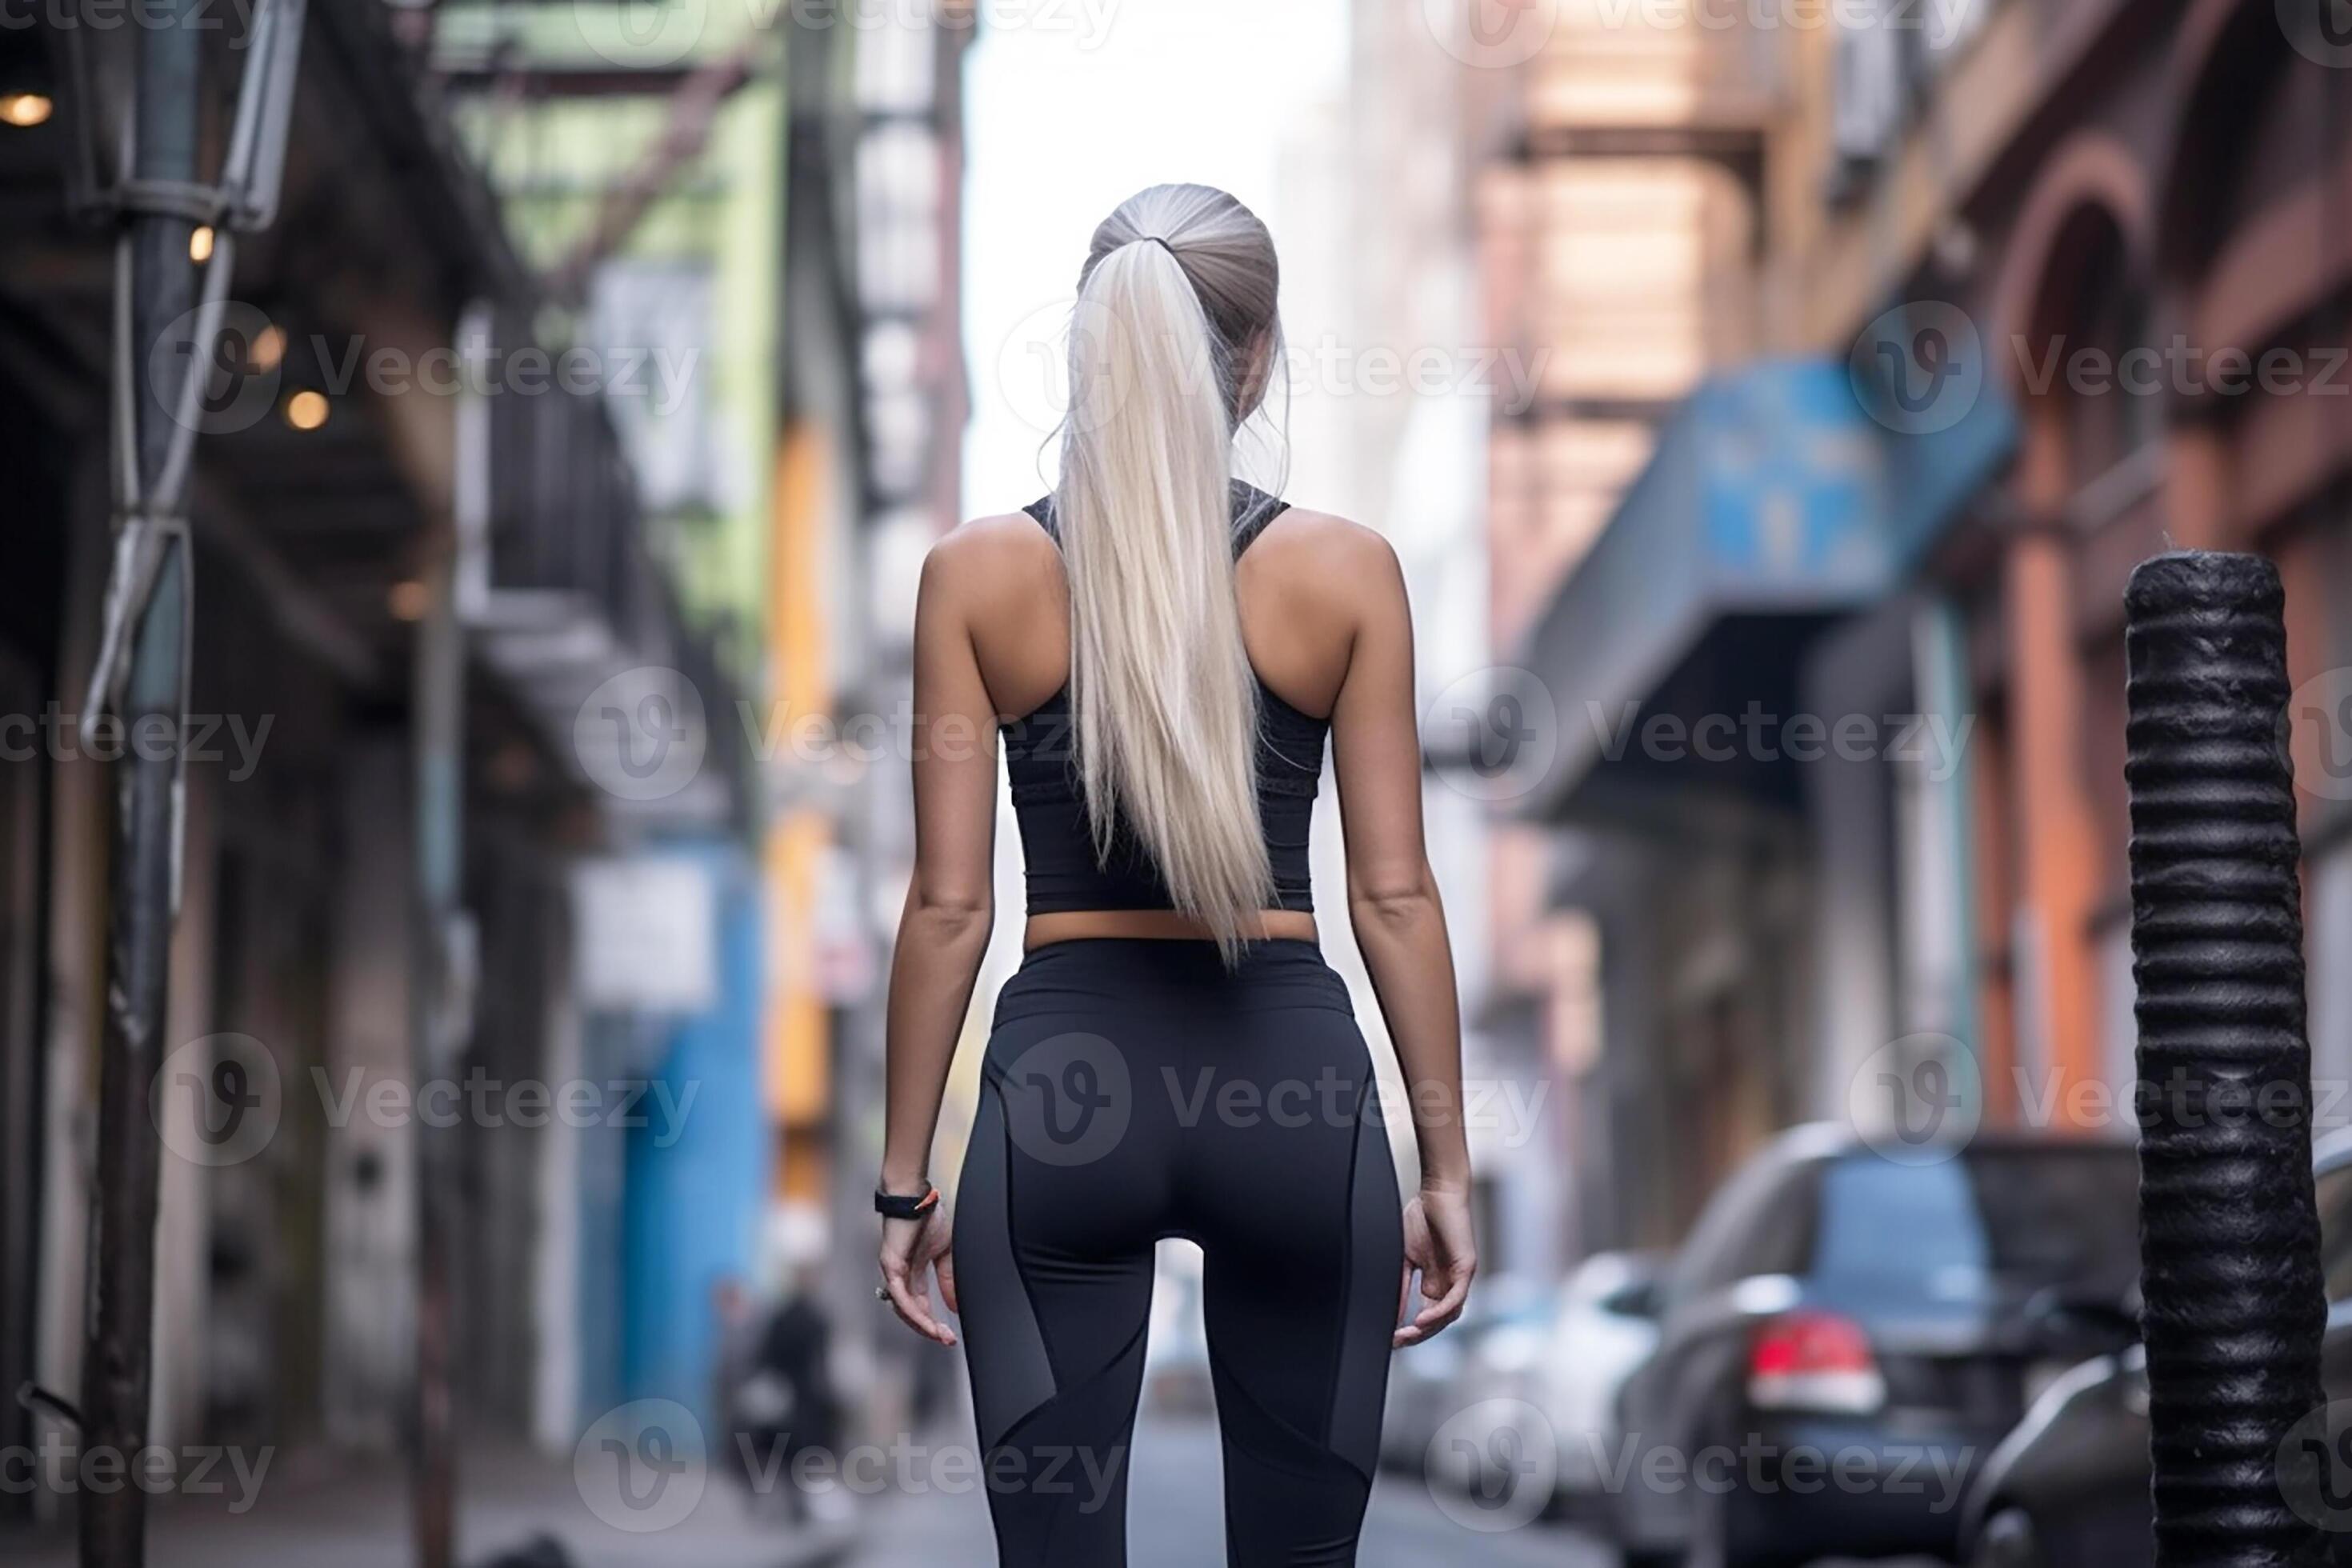 https://static.vecteezy.com/system/resources/previews/024/033/575/large_2x/sporty-athletic-girl-in-leggings-rear-view-generative-ai-photo.jpg